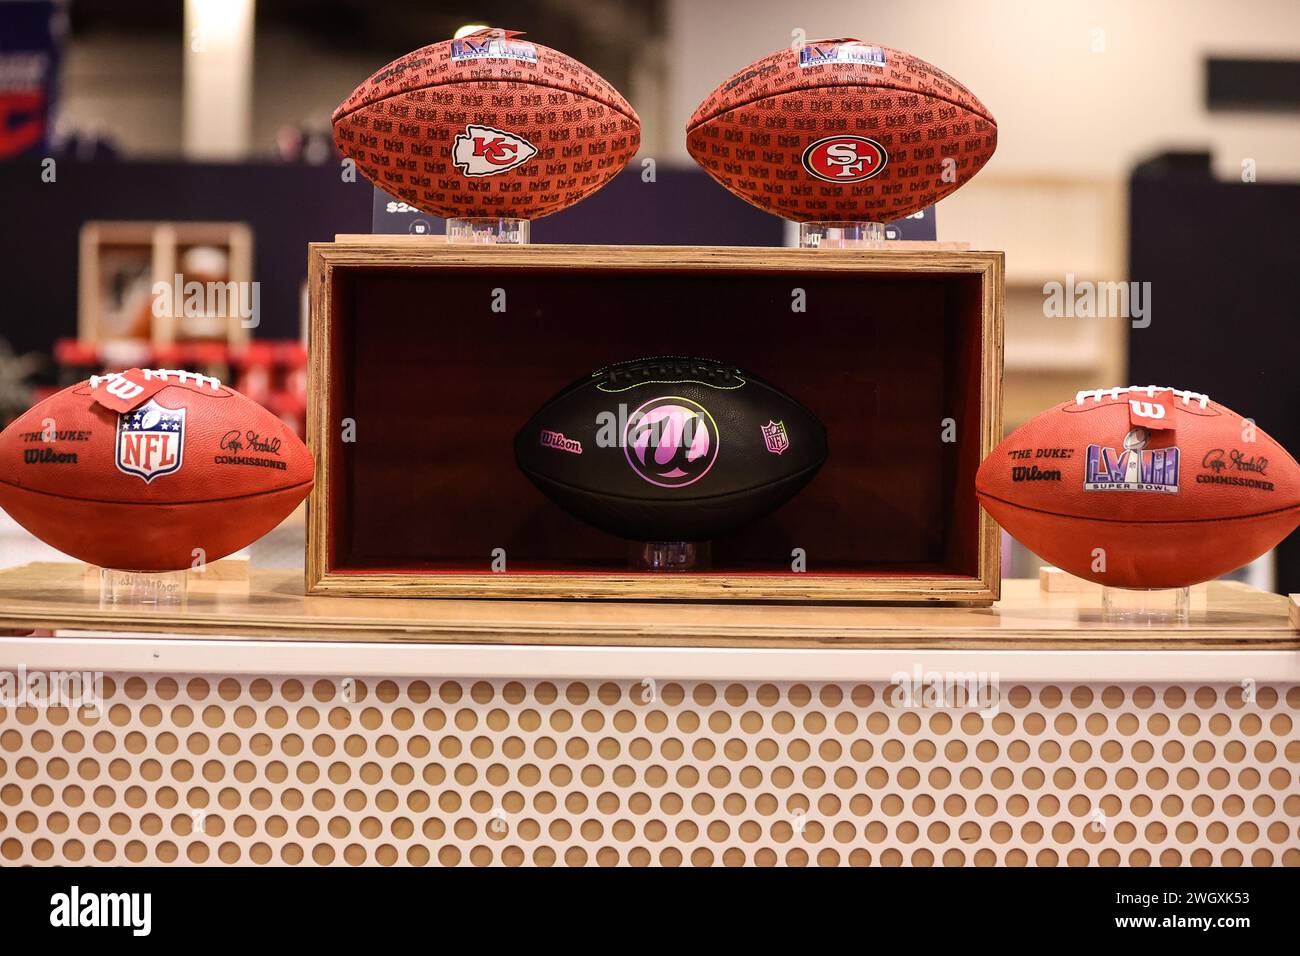 Las Vegas, NV, USA. 06th Feb, 2024. A sneak preview of the Usher/Wilson NFL football (center), that will only be available online, on display inside the Super Bowl Experience taking place from Wednesday, February 7 - Saturday, February 10 at the Mandalay Bay Convention Center in Las Vegas, NV. Christopher Trim/CSM/Alamy Live News Stock Photo